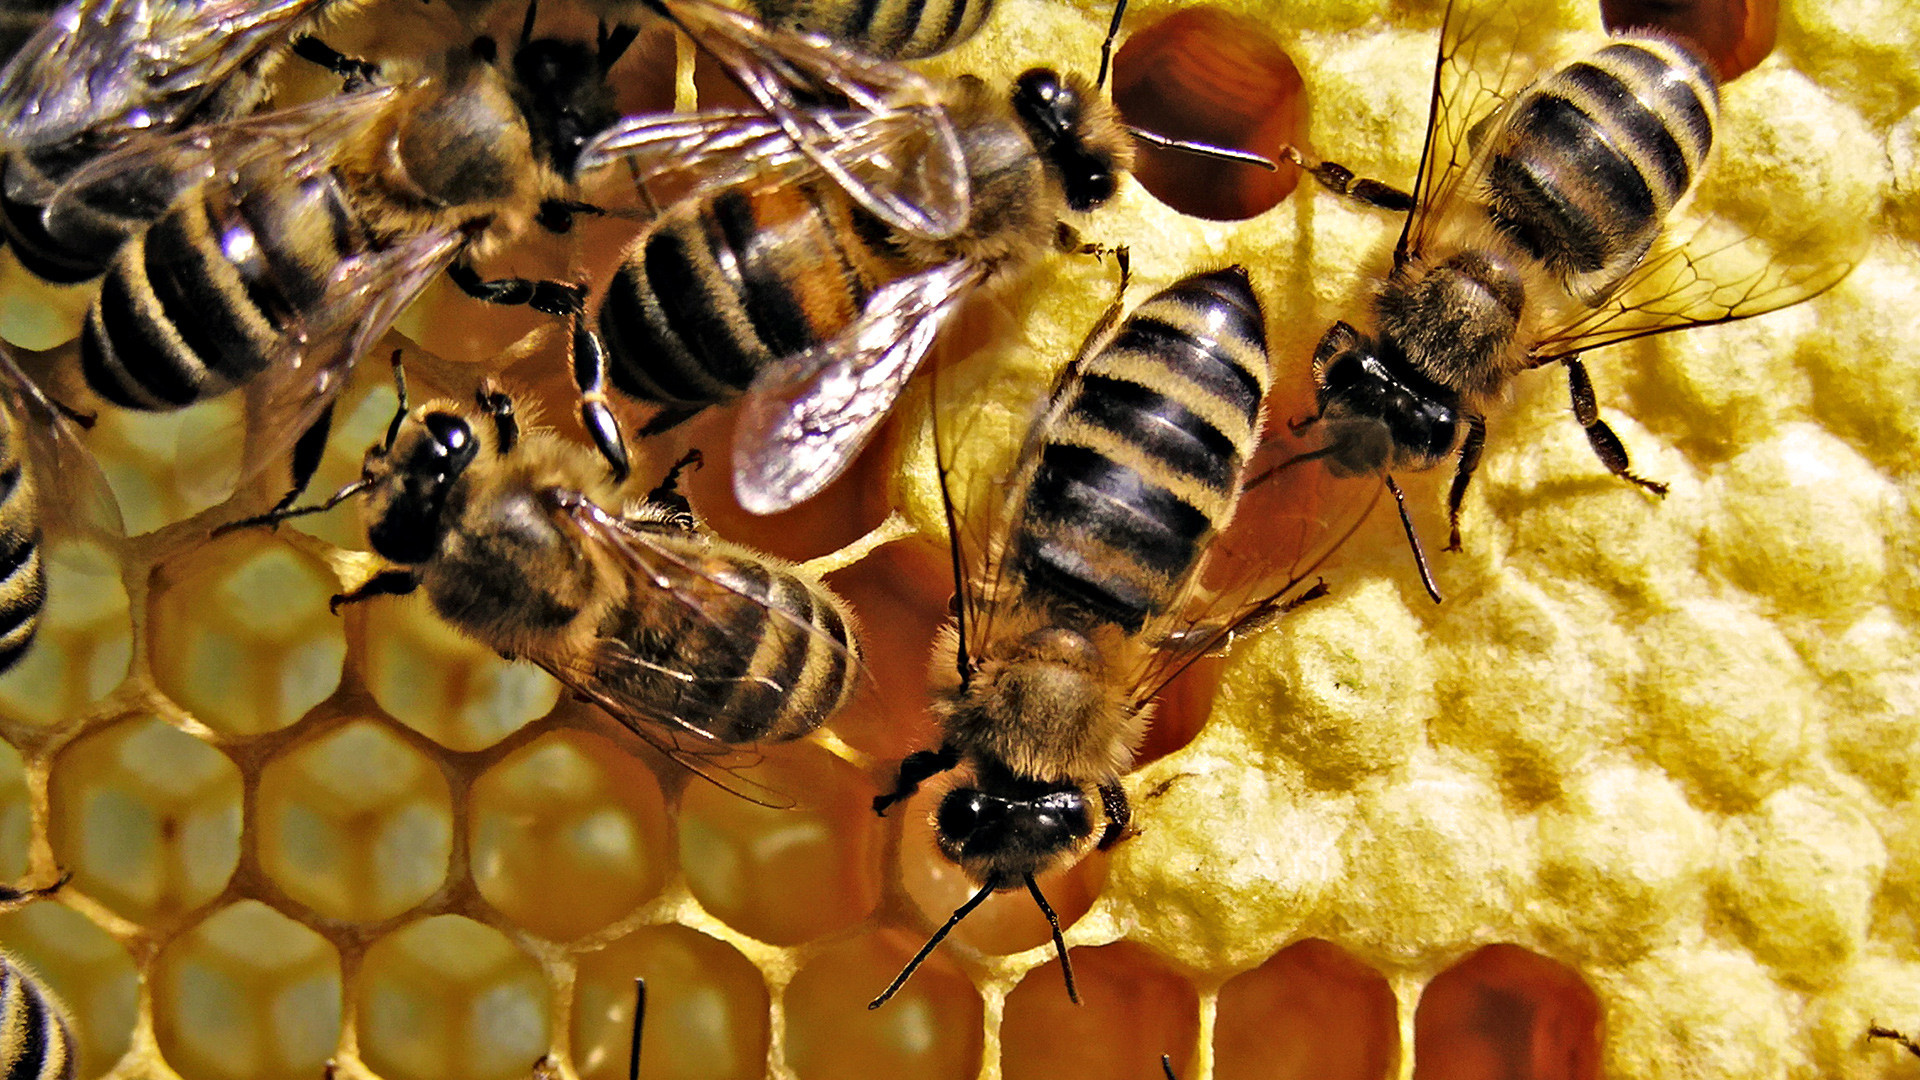 Bee: A mass of hexagonal prismatic wax cells, Nests to contain the larvae. 1920x1080 Full HD Wallpaper.